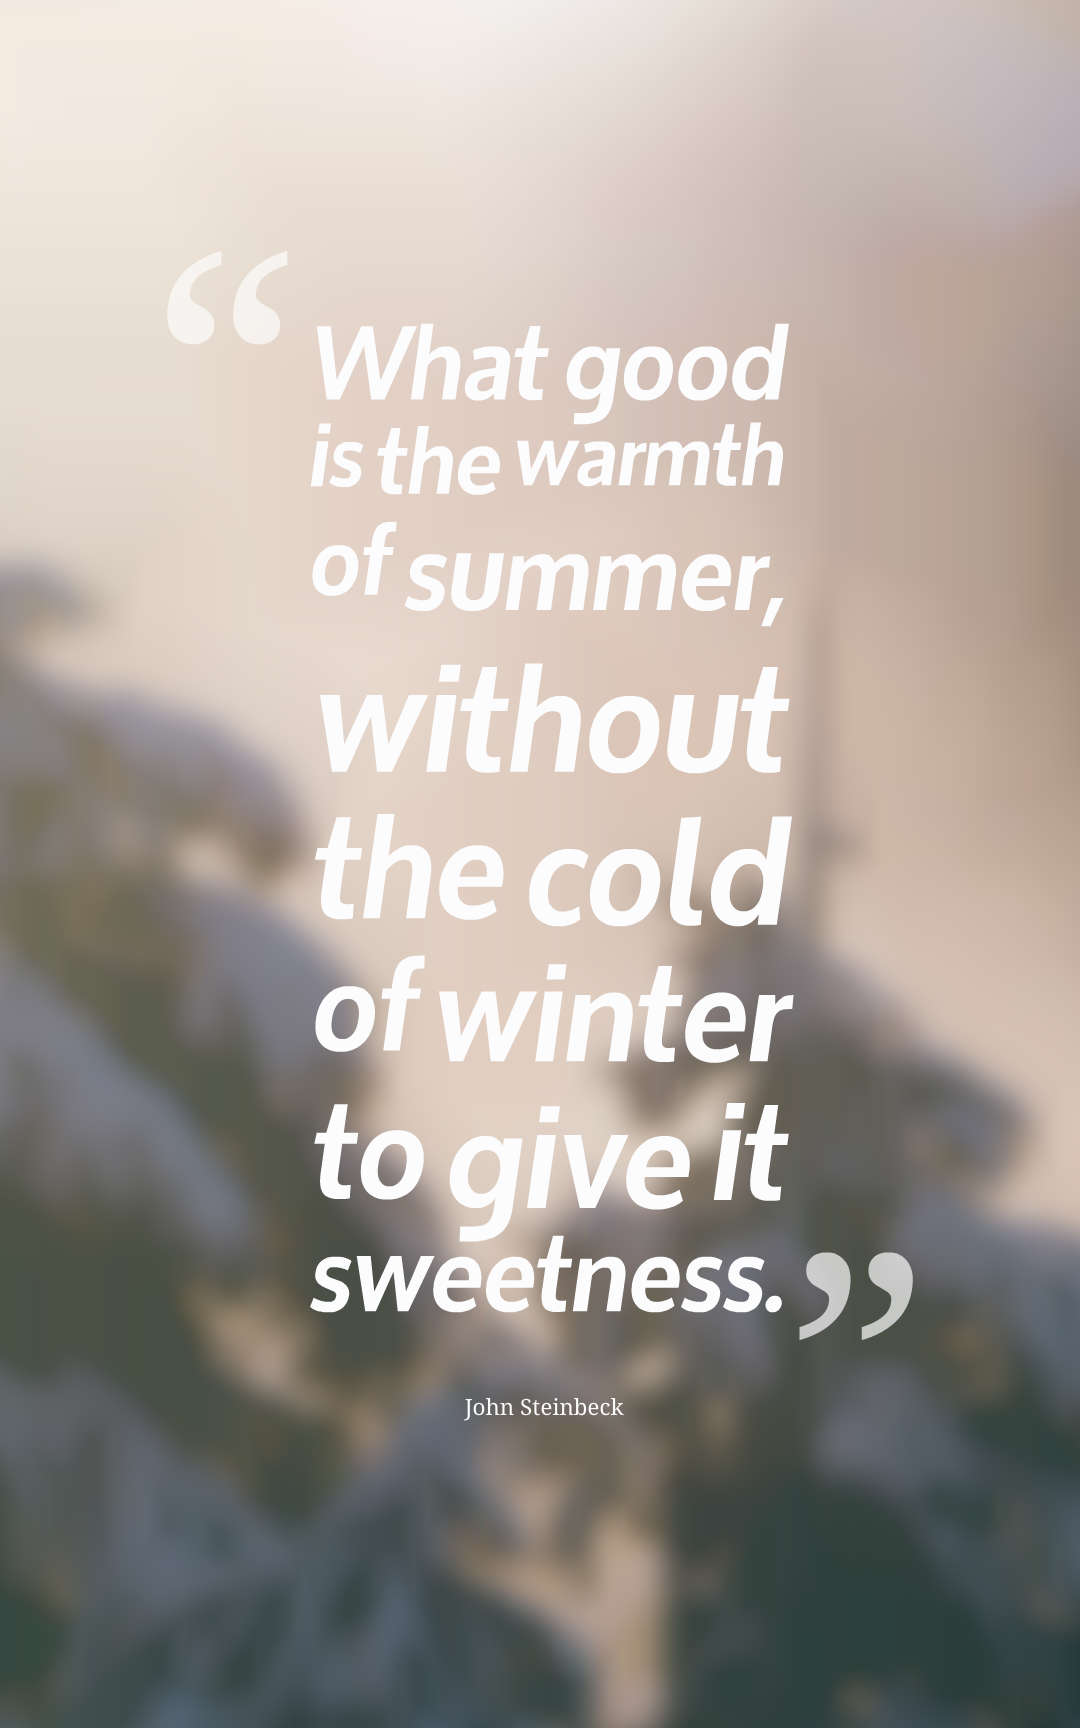 What good is the warmth of summer, without the cold of winter to give it sweetness.